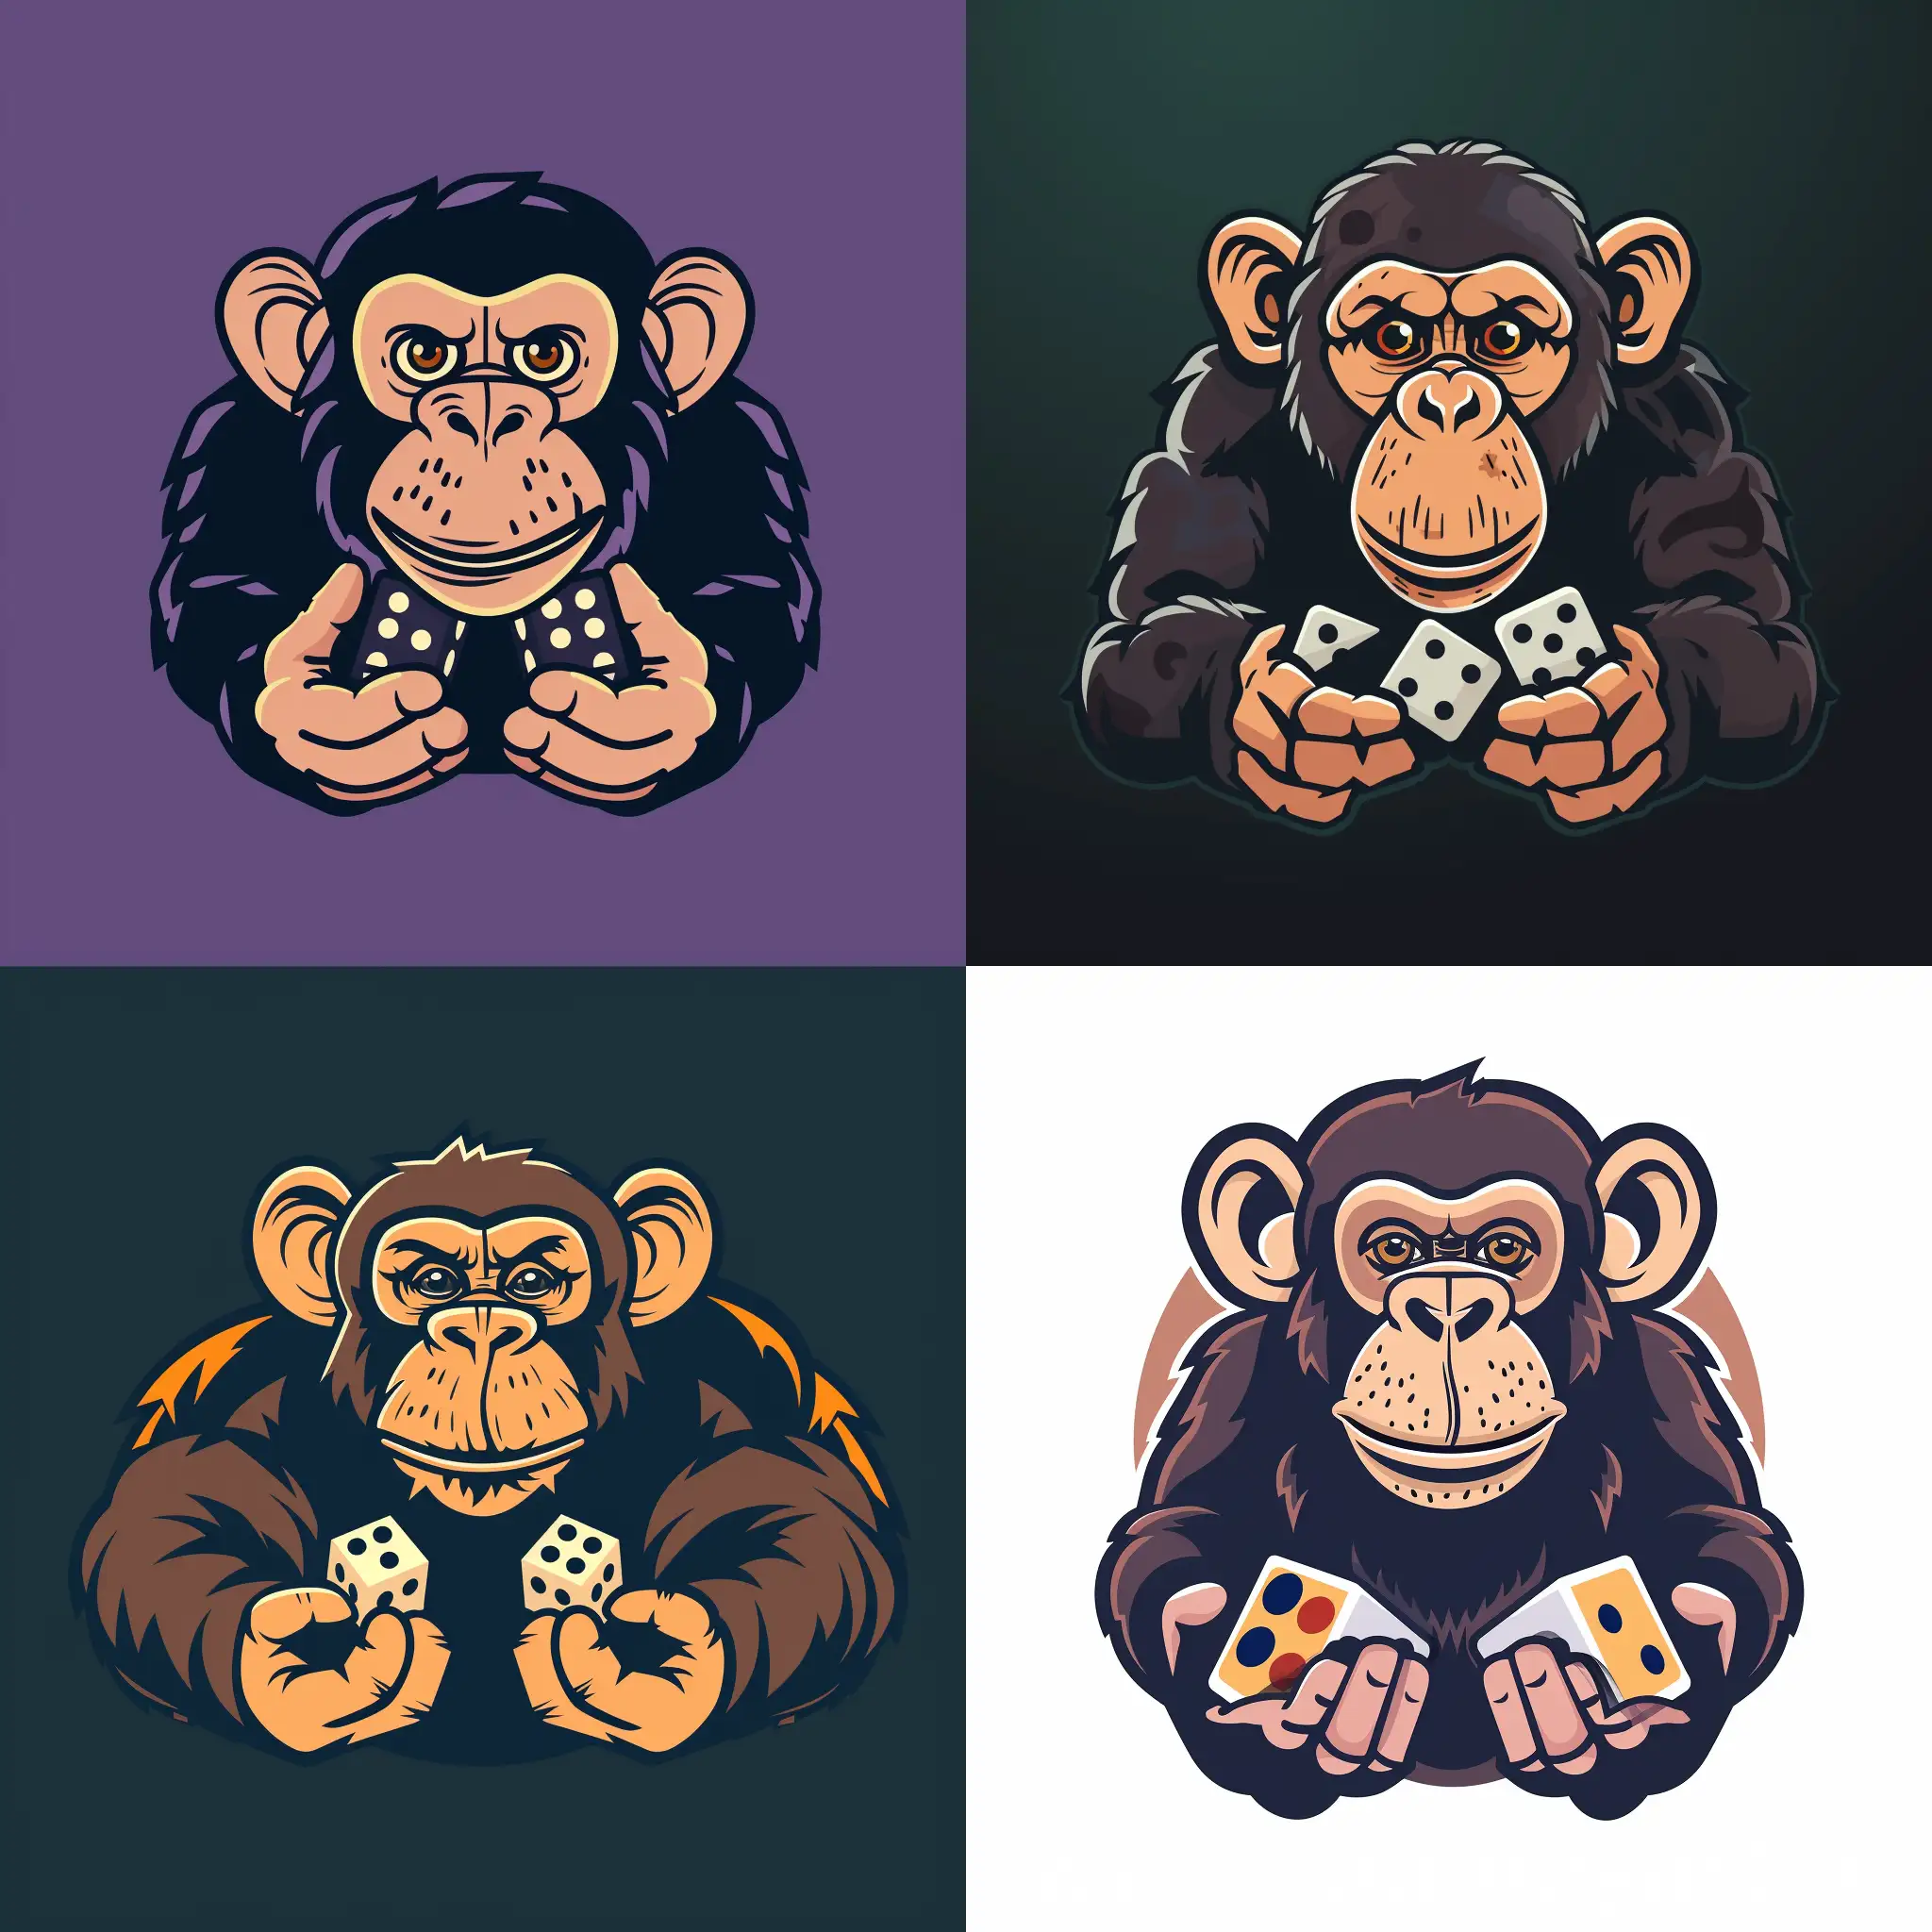 Monkey-Holding-Dice-Playful-Logo-for-Board-Game-Company